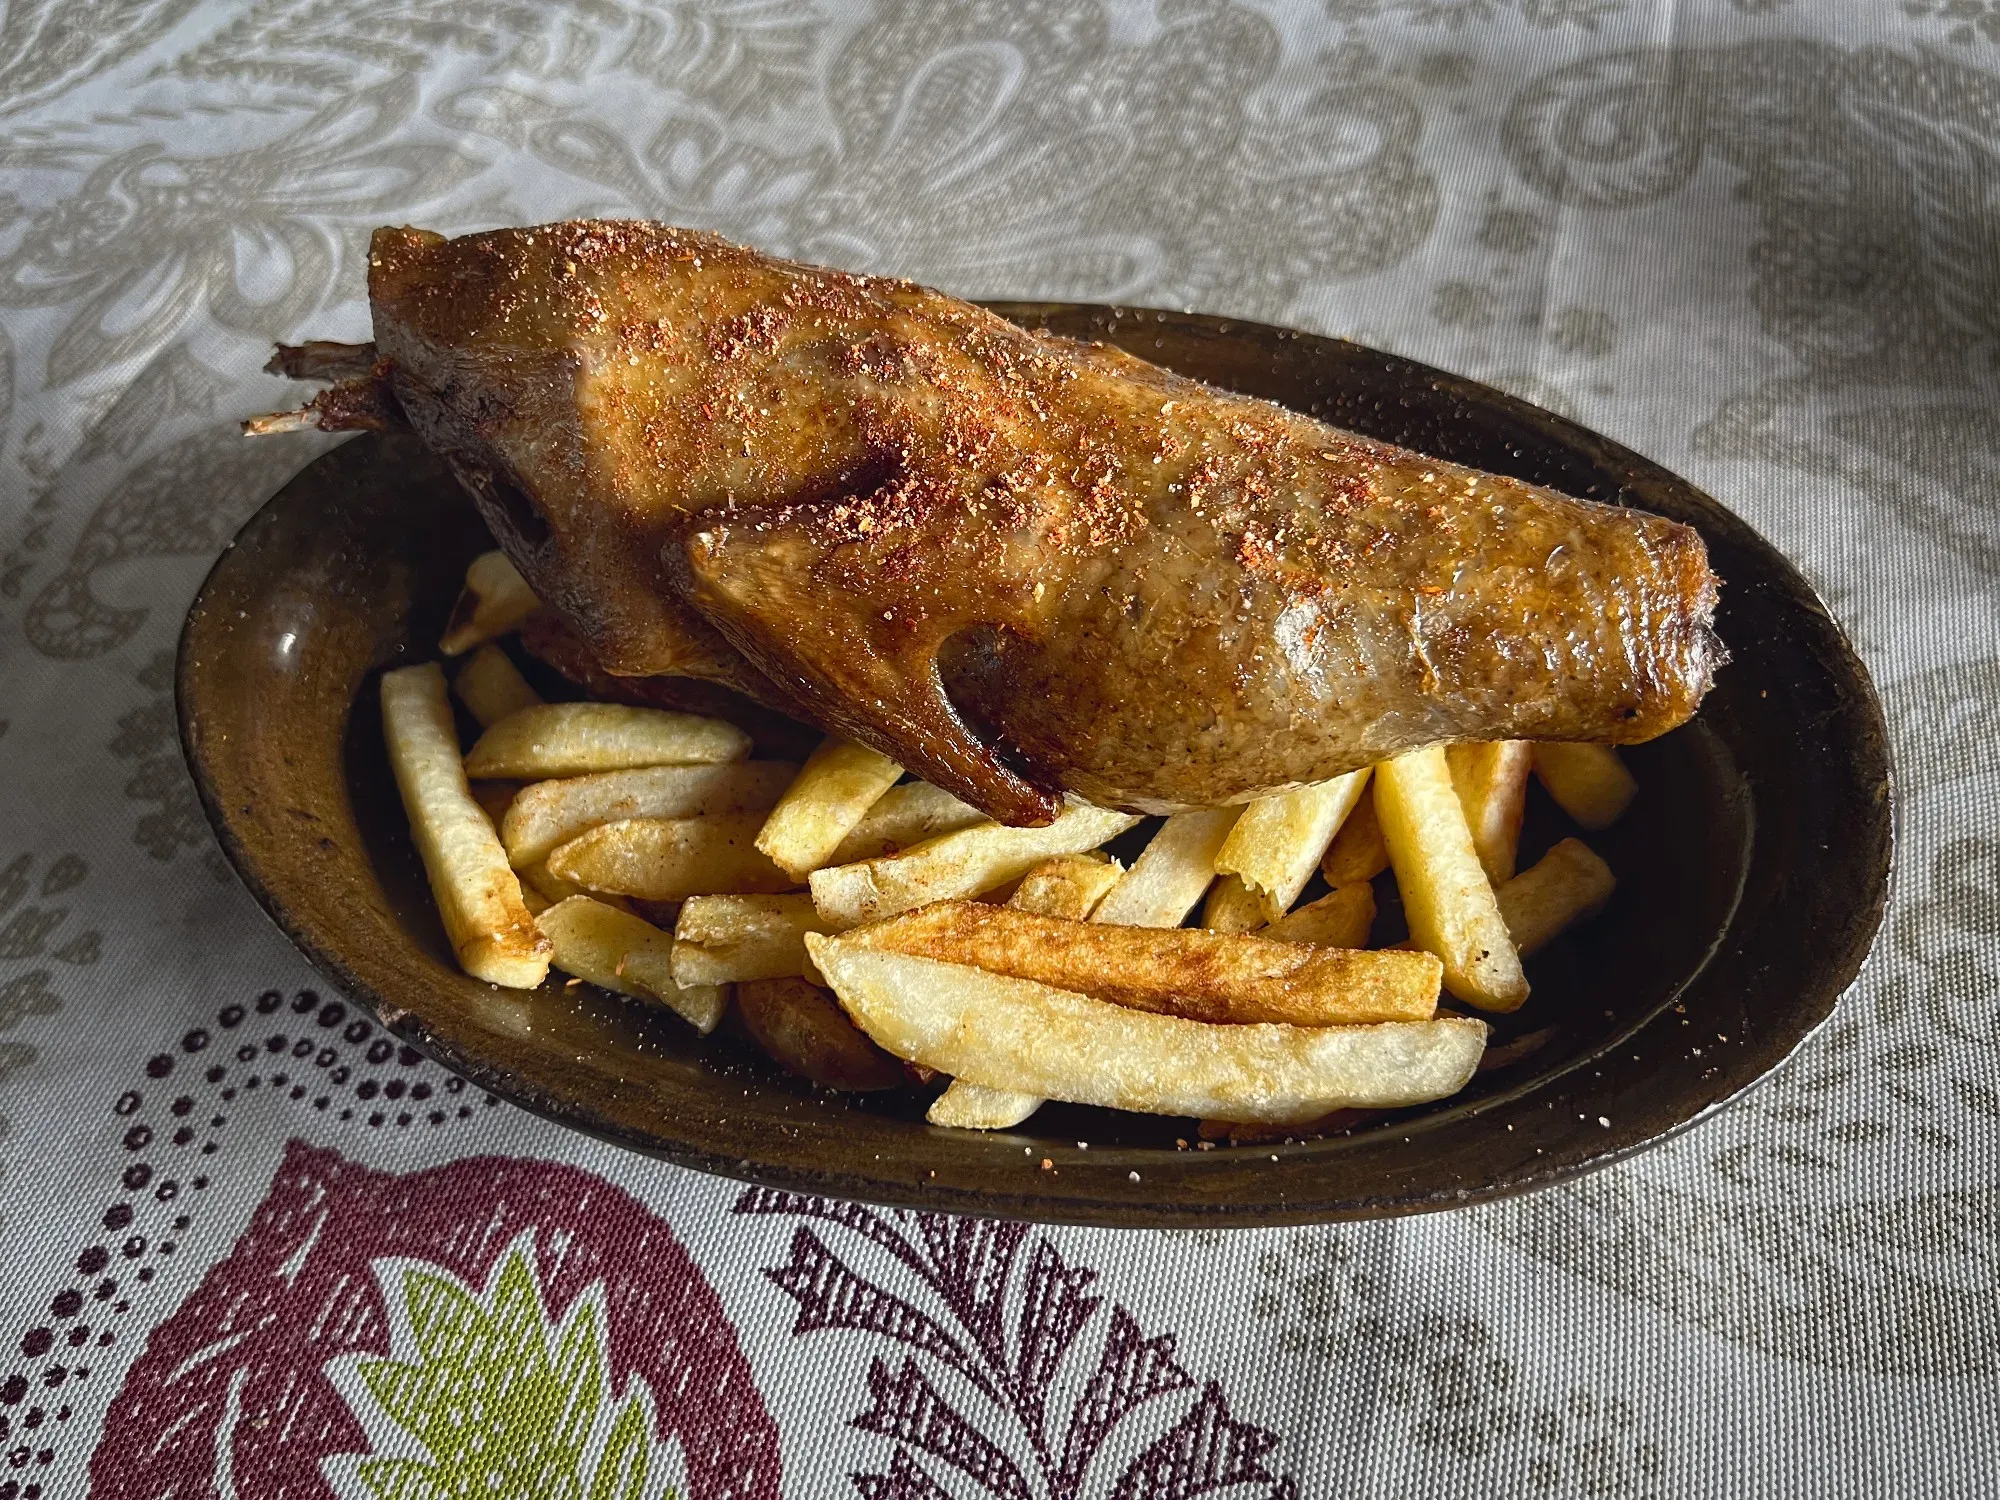 A whole stuffed pigeon lying on a bed of fries, table shot.